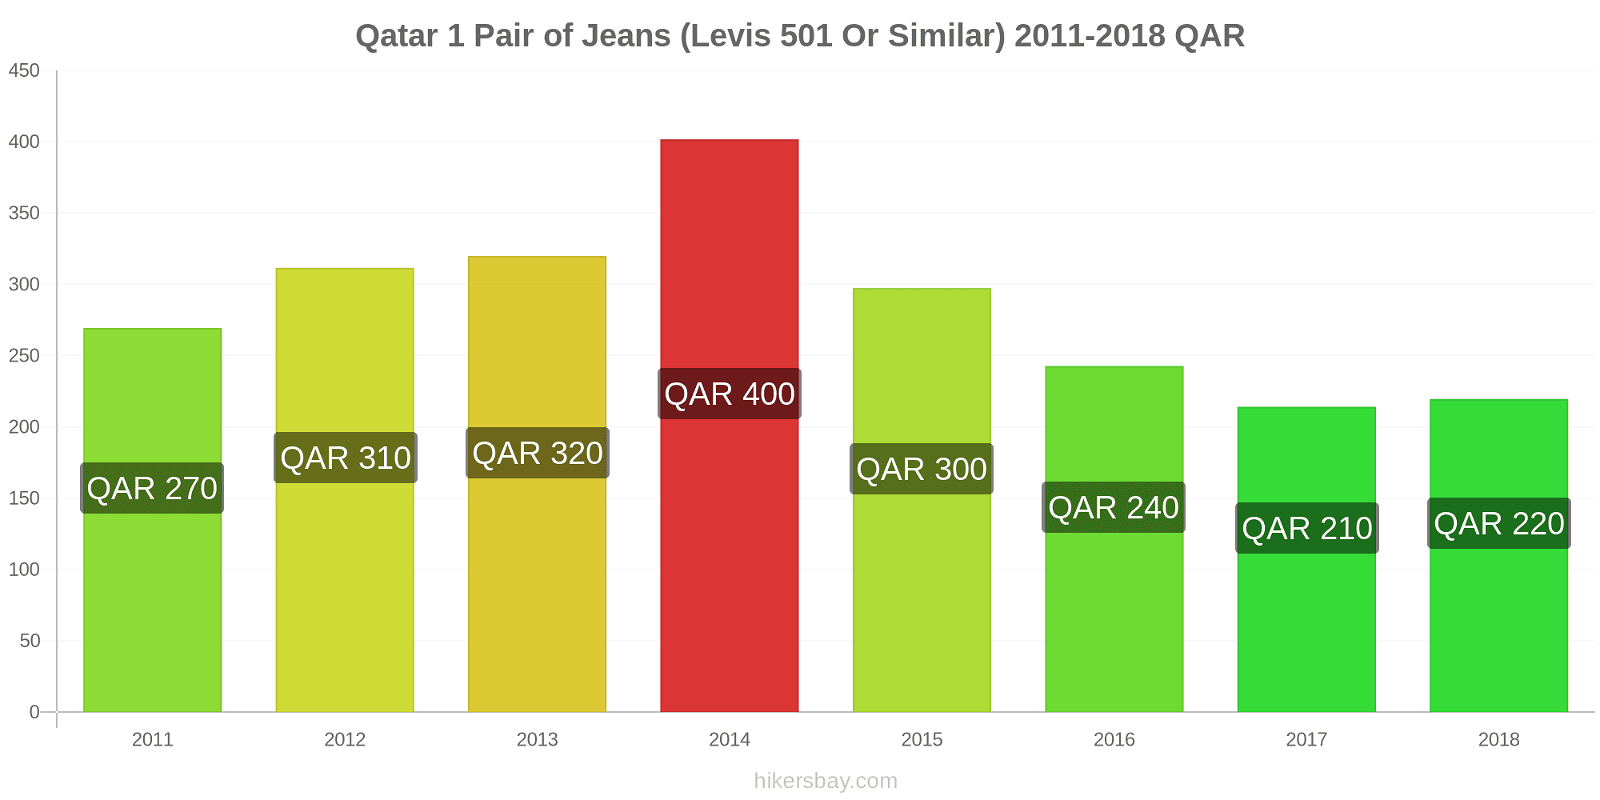 Qatar price changes 1 pair of jeans (Levis 501 or similar) hikersbay.com